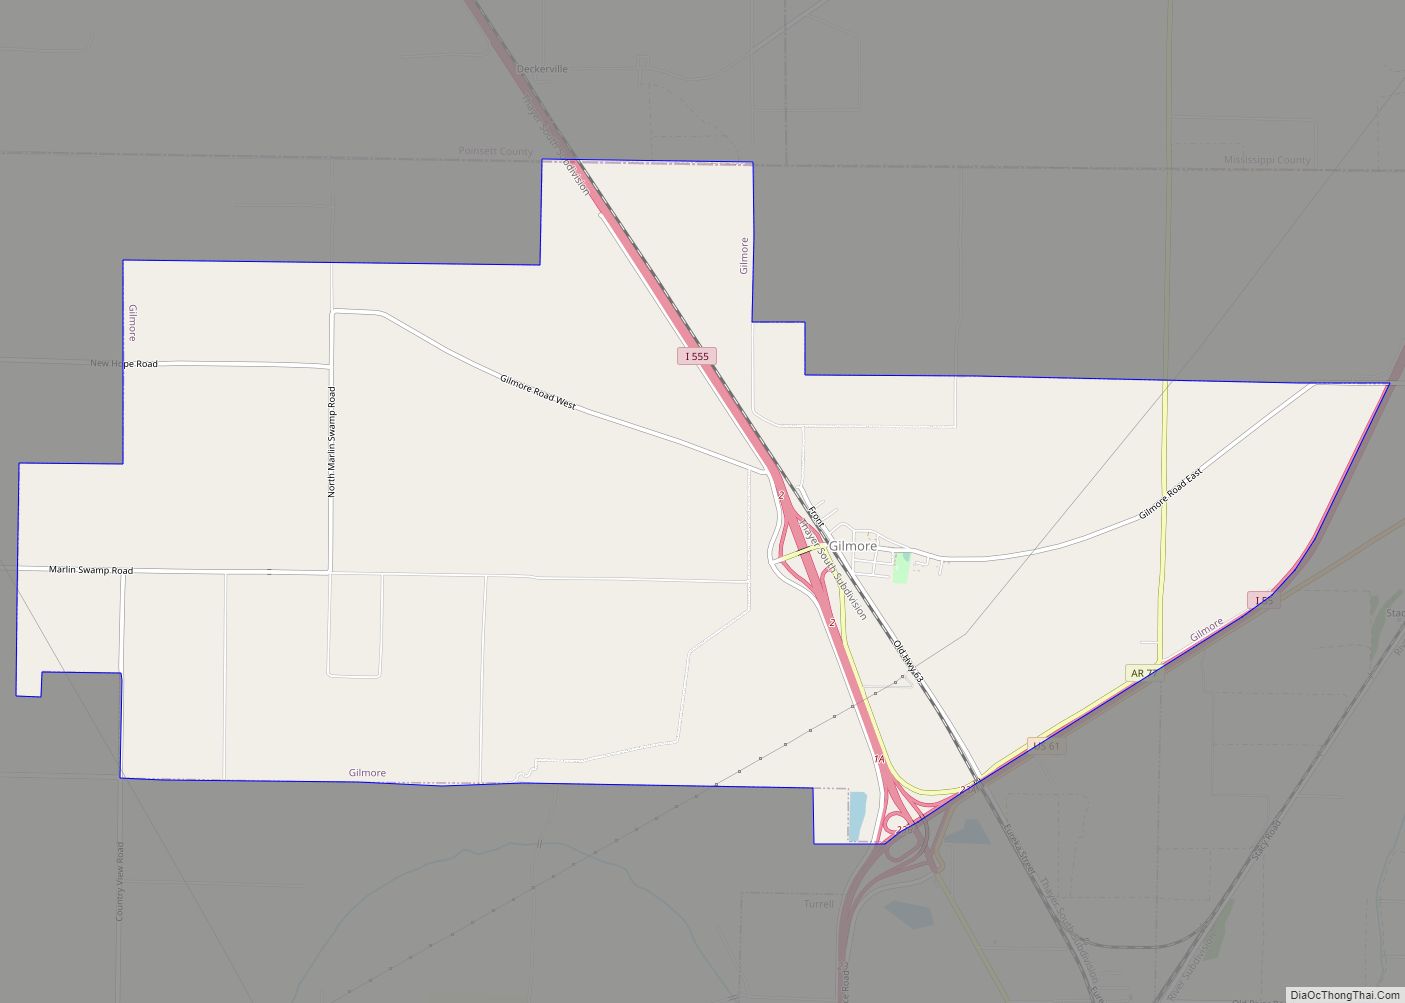 Map of Gilmore city